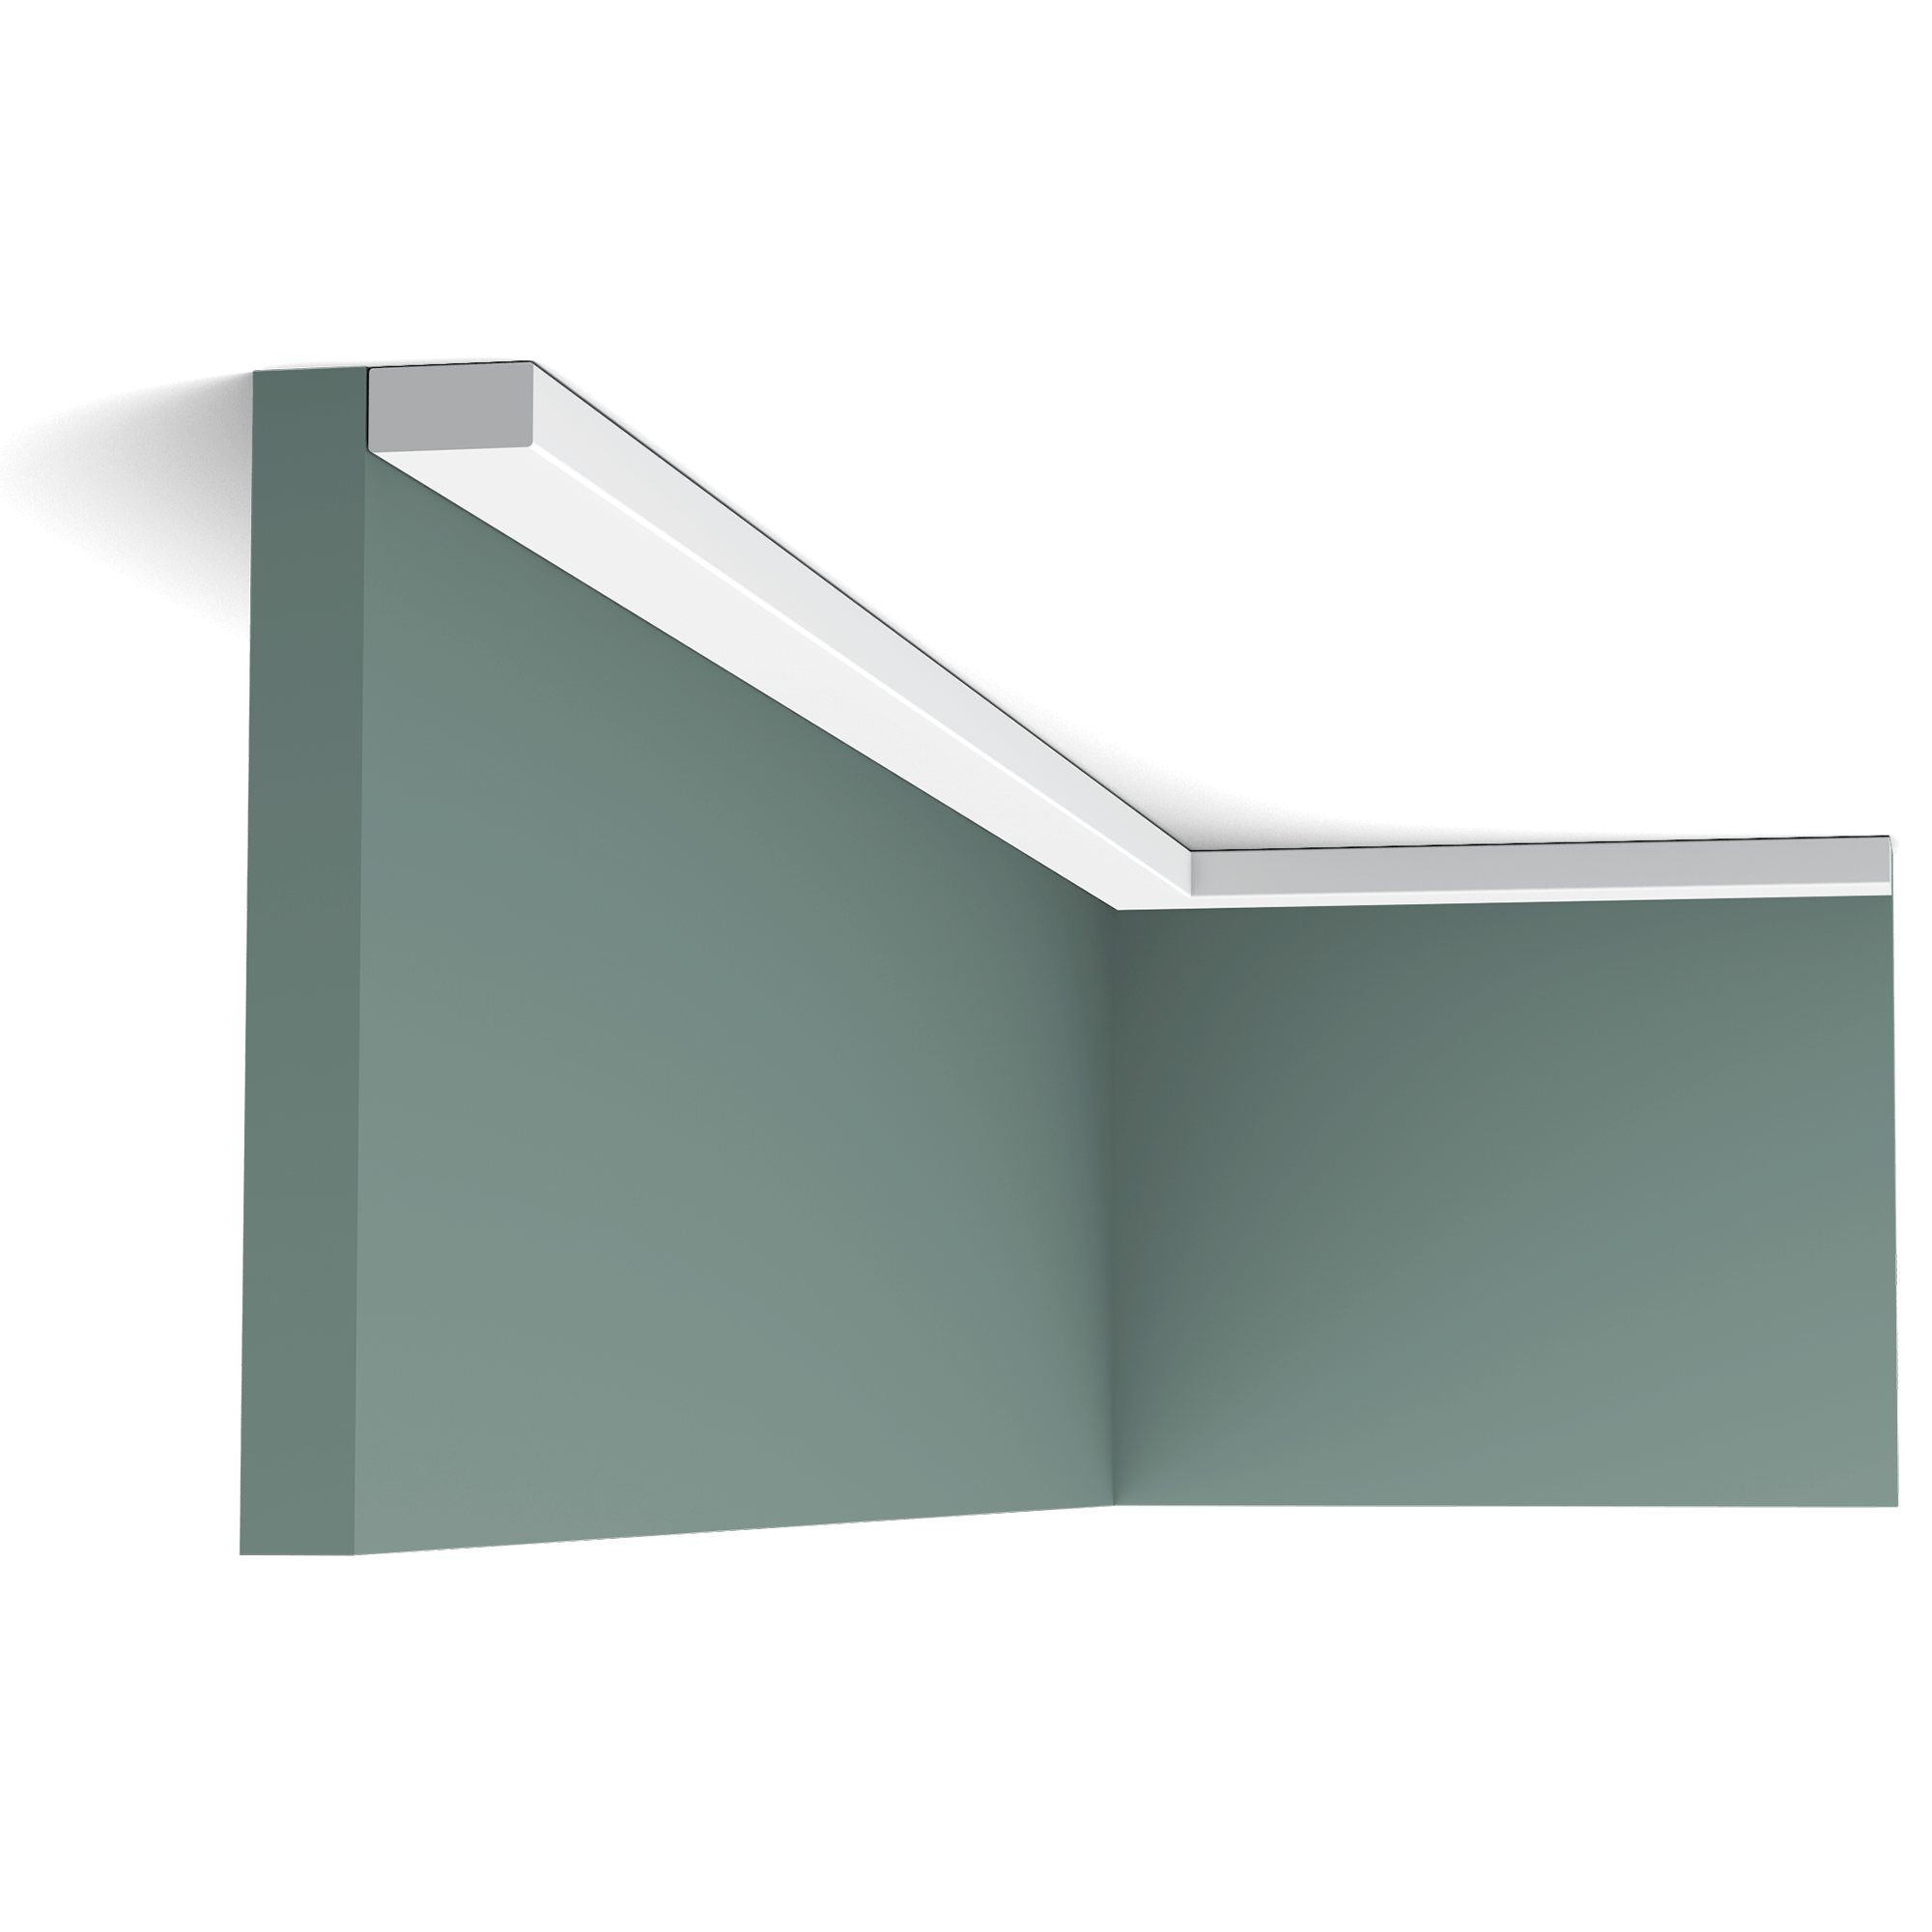 The SX194 is our smallest and simplest profile and is part of the SQUARE family. This multifunctional profile can be used as panel moulding to finish a wainscoting or as a skirting board to create a subtle transition between floor and wall.